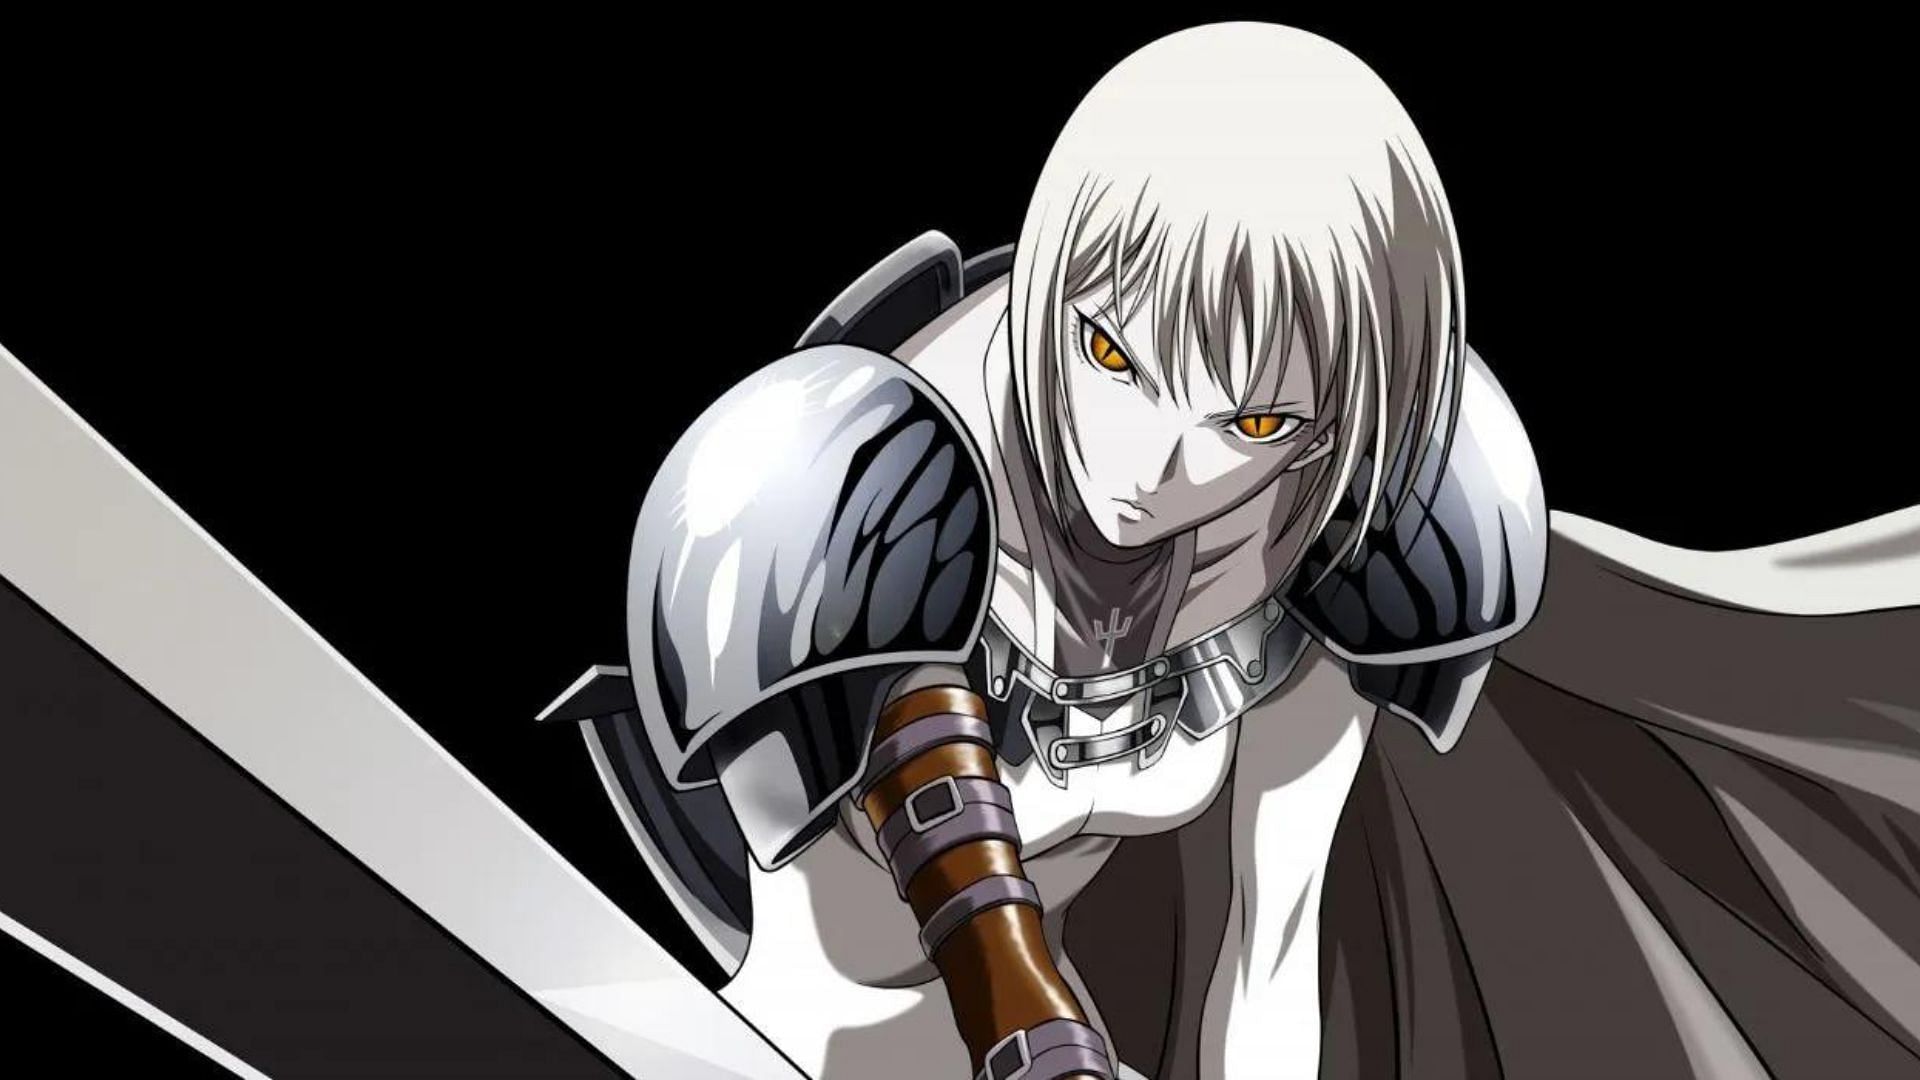 Claymore (Image via Madhouse)